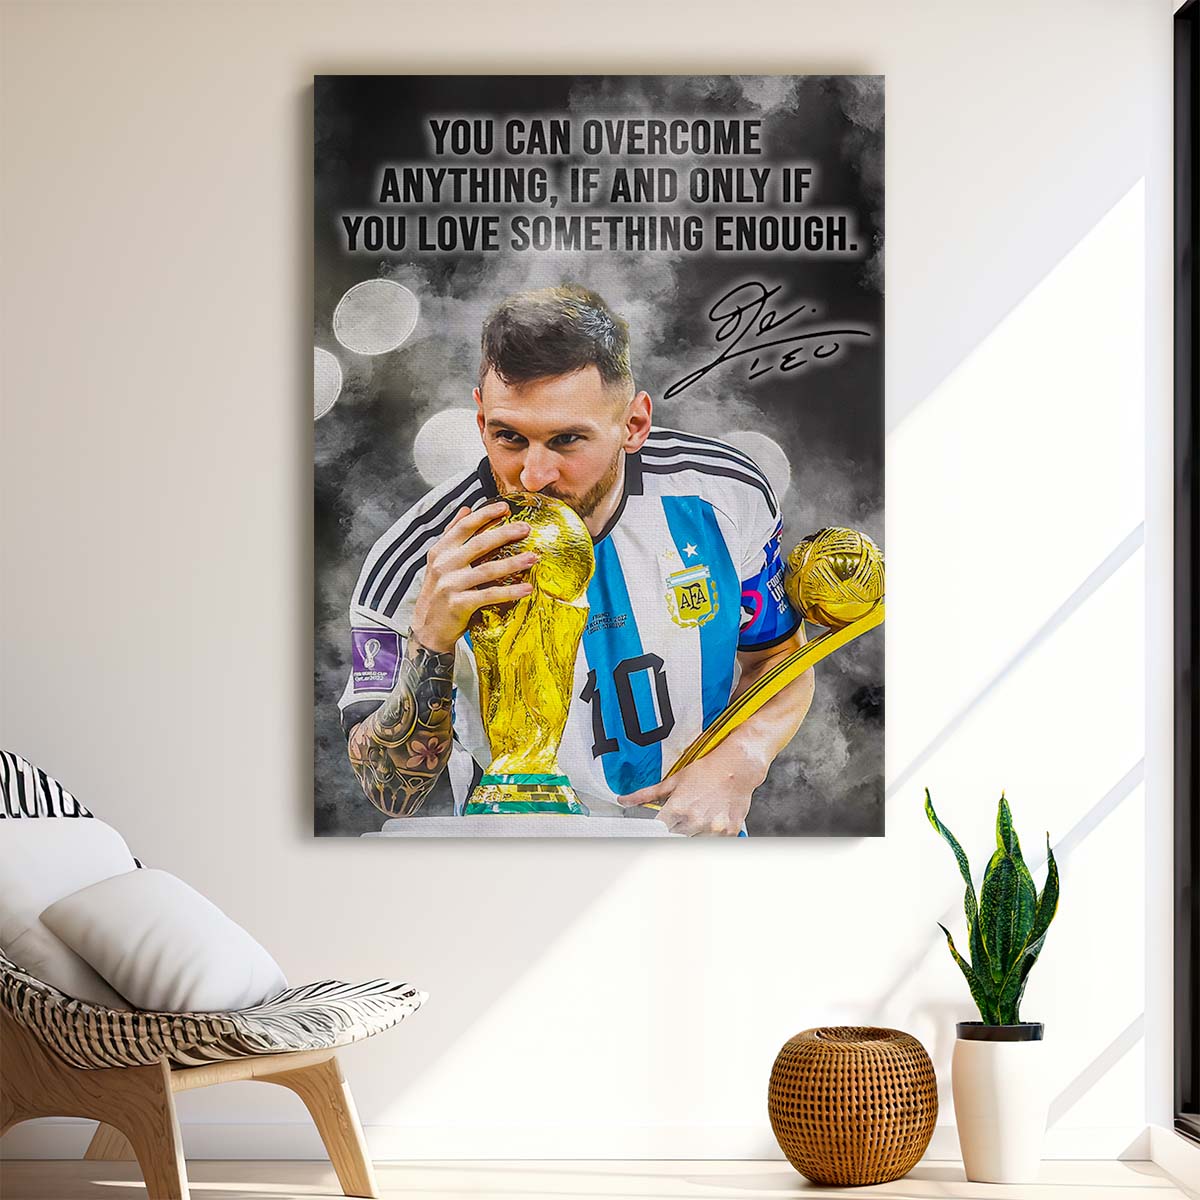 Leo Messi World Cup Overcome Anything Wall Art by Luxuriance Designs. Made in USA.